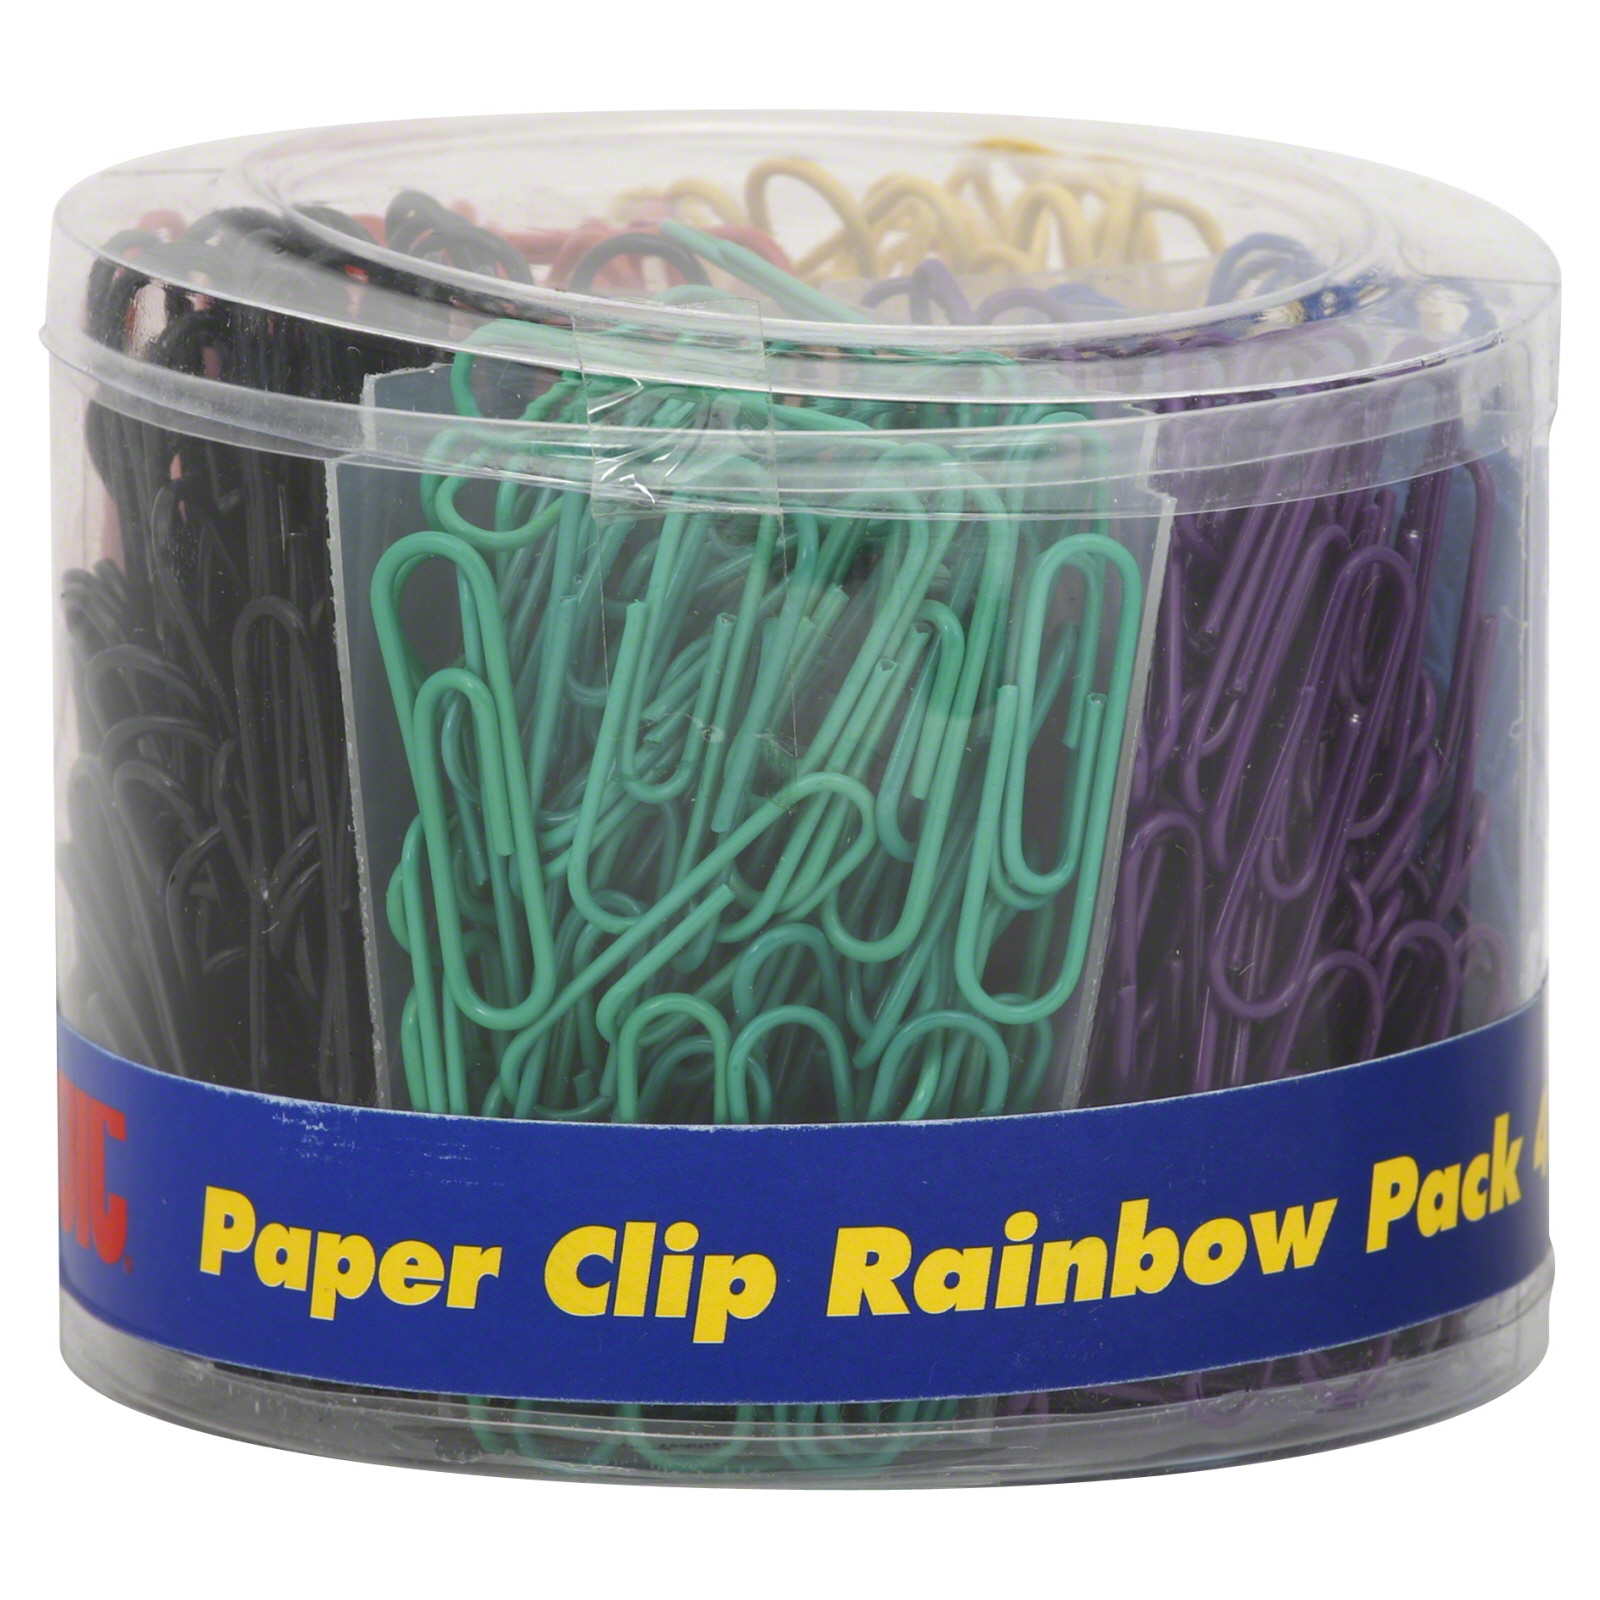 97213 OIC Paper Clip, Rainbow Pack, 450 paper clips